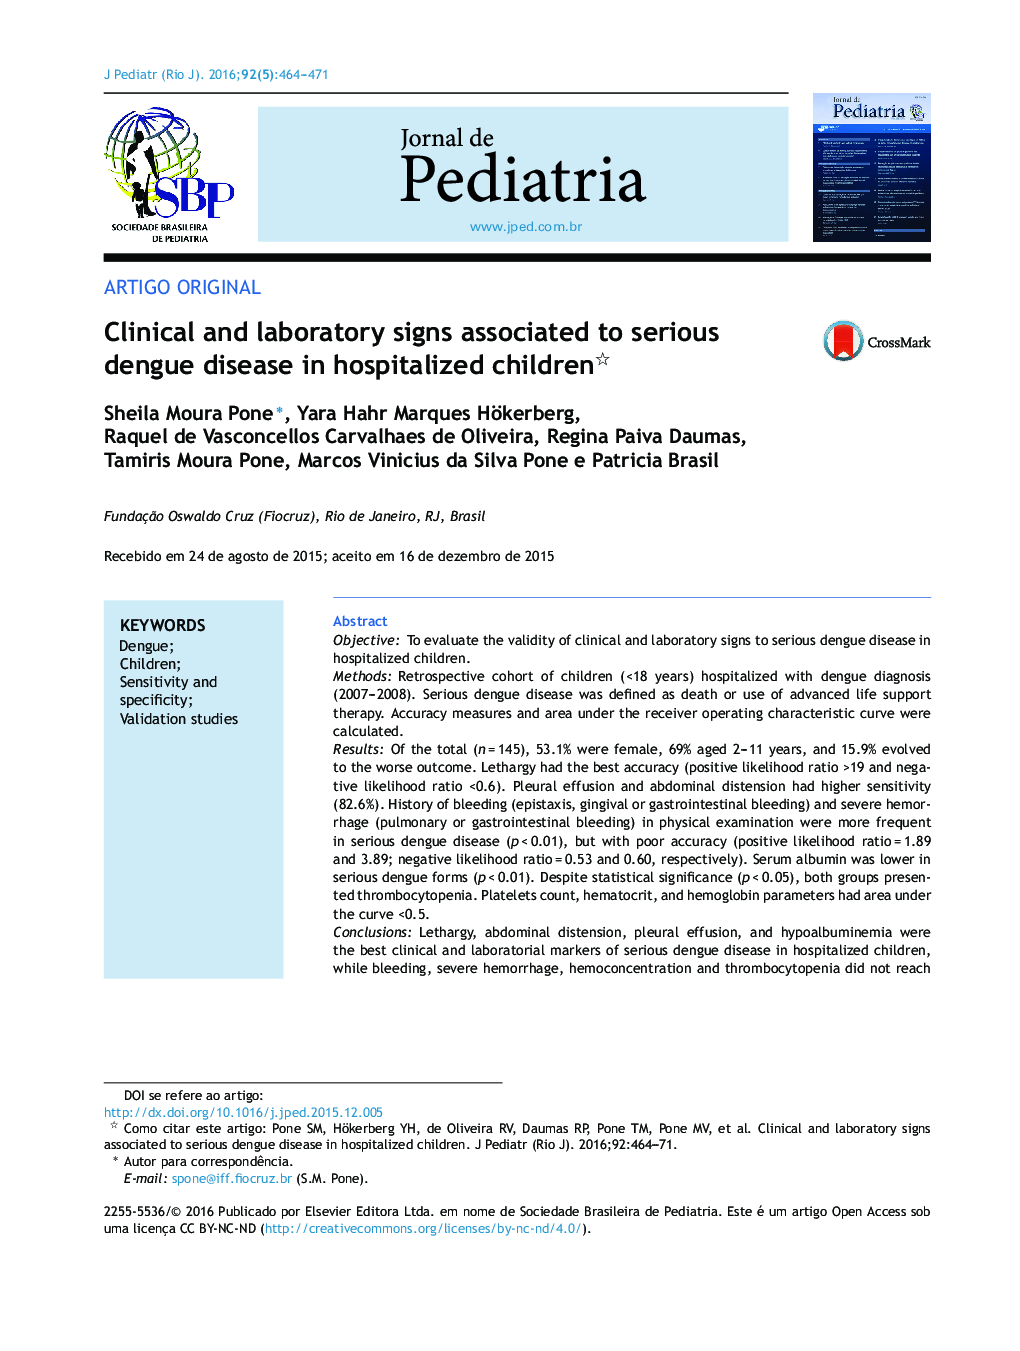 Clinical and laboratory signs associated to serious dengue disease in hospitalized children 